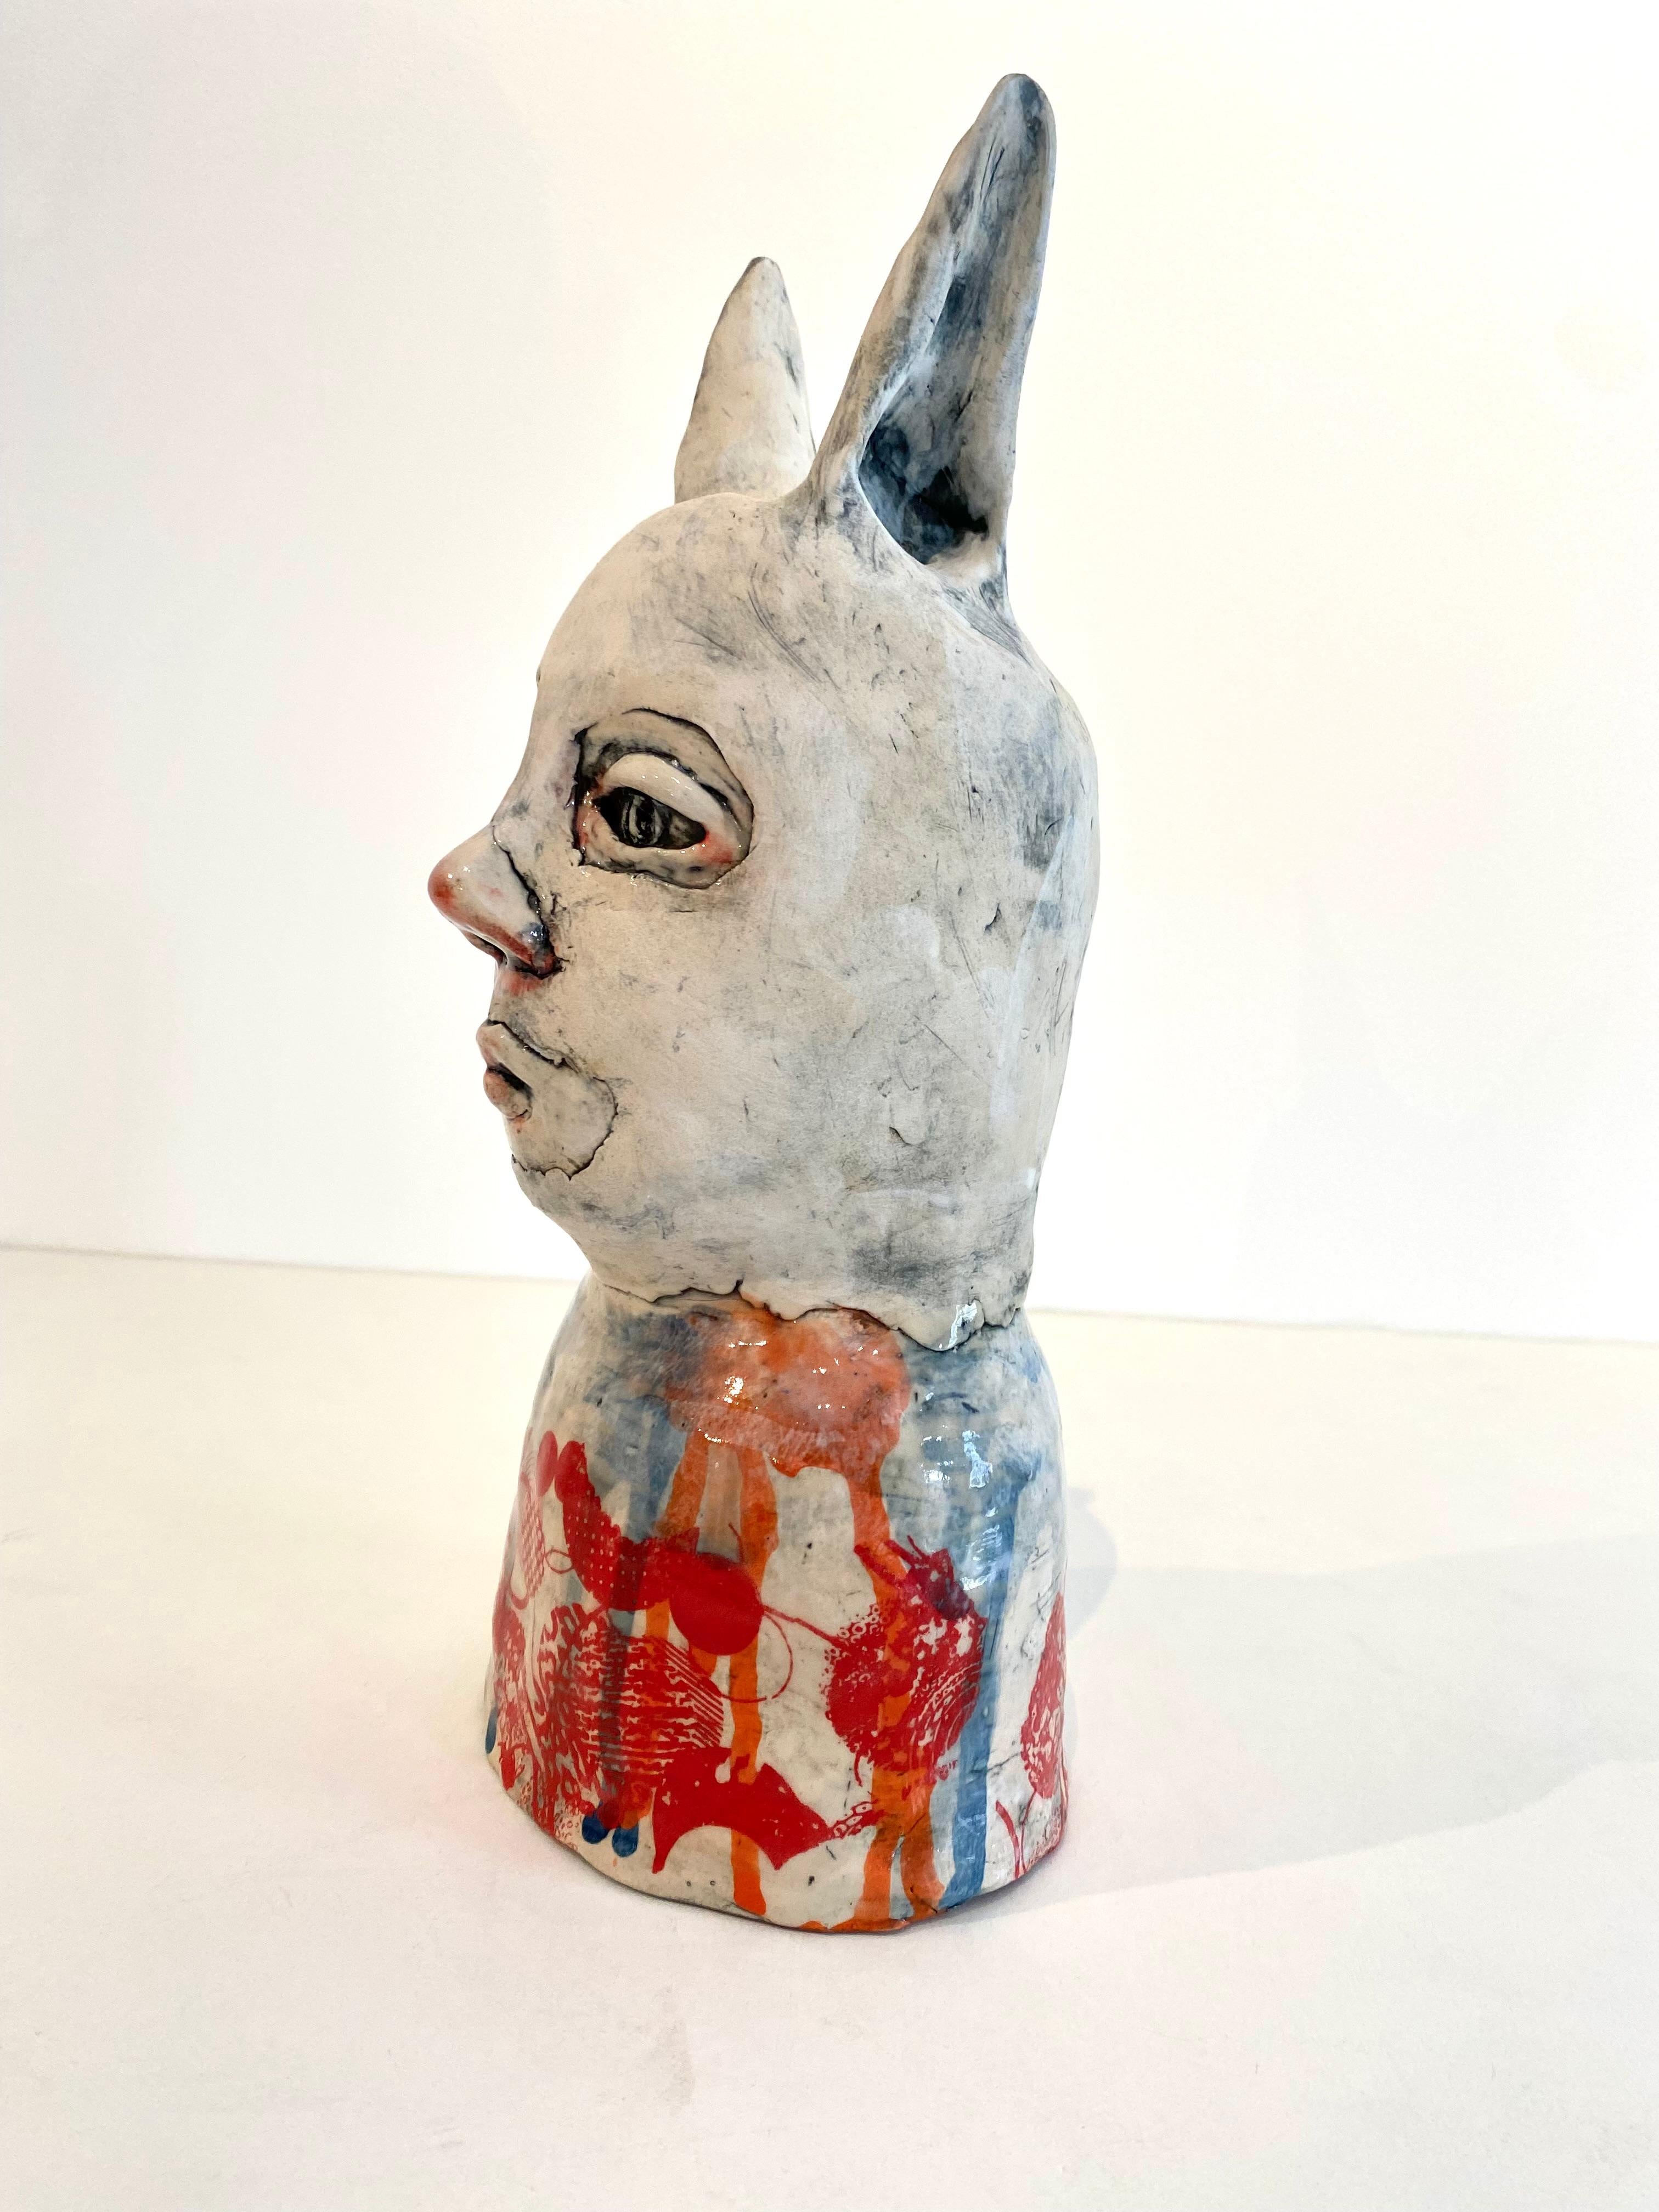 Ceramic Bunny Person: 'He’s love and light and all things bright and dark' - Sculpture by Ashley Benton